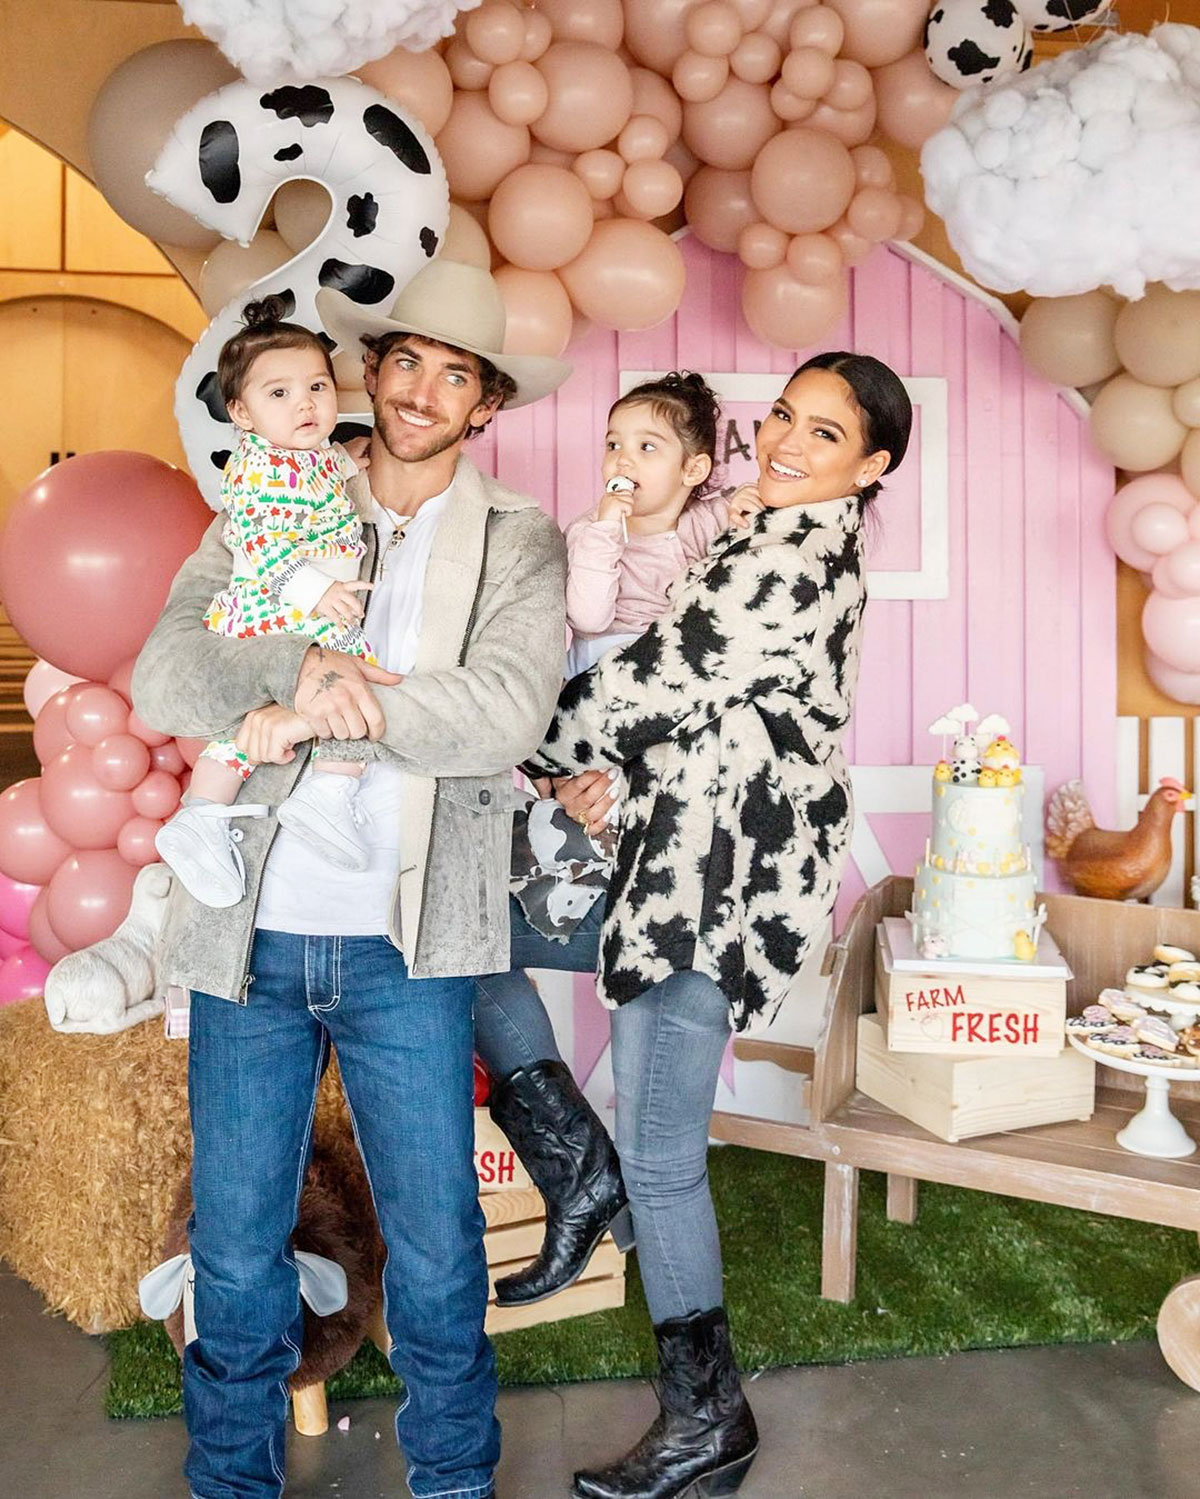 Jessica Simpson's Barbie Party for Daughter Birdie Is Simply Fantastic